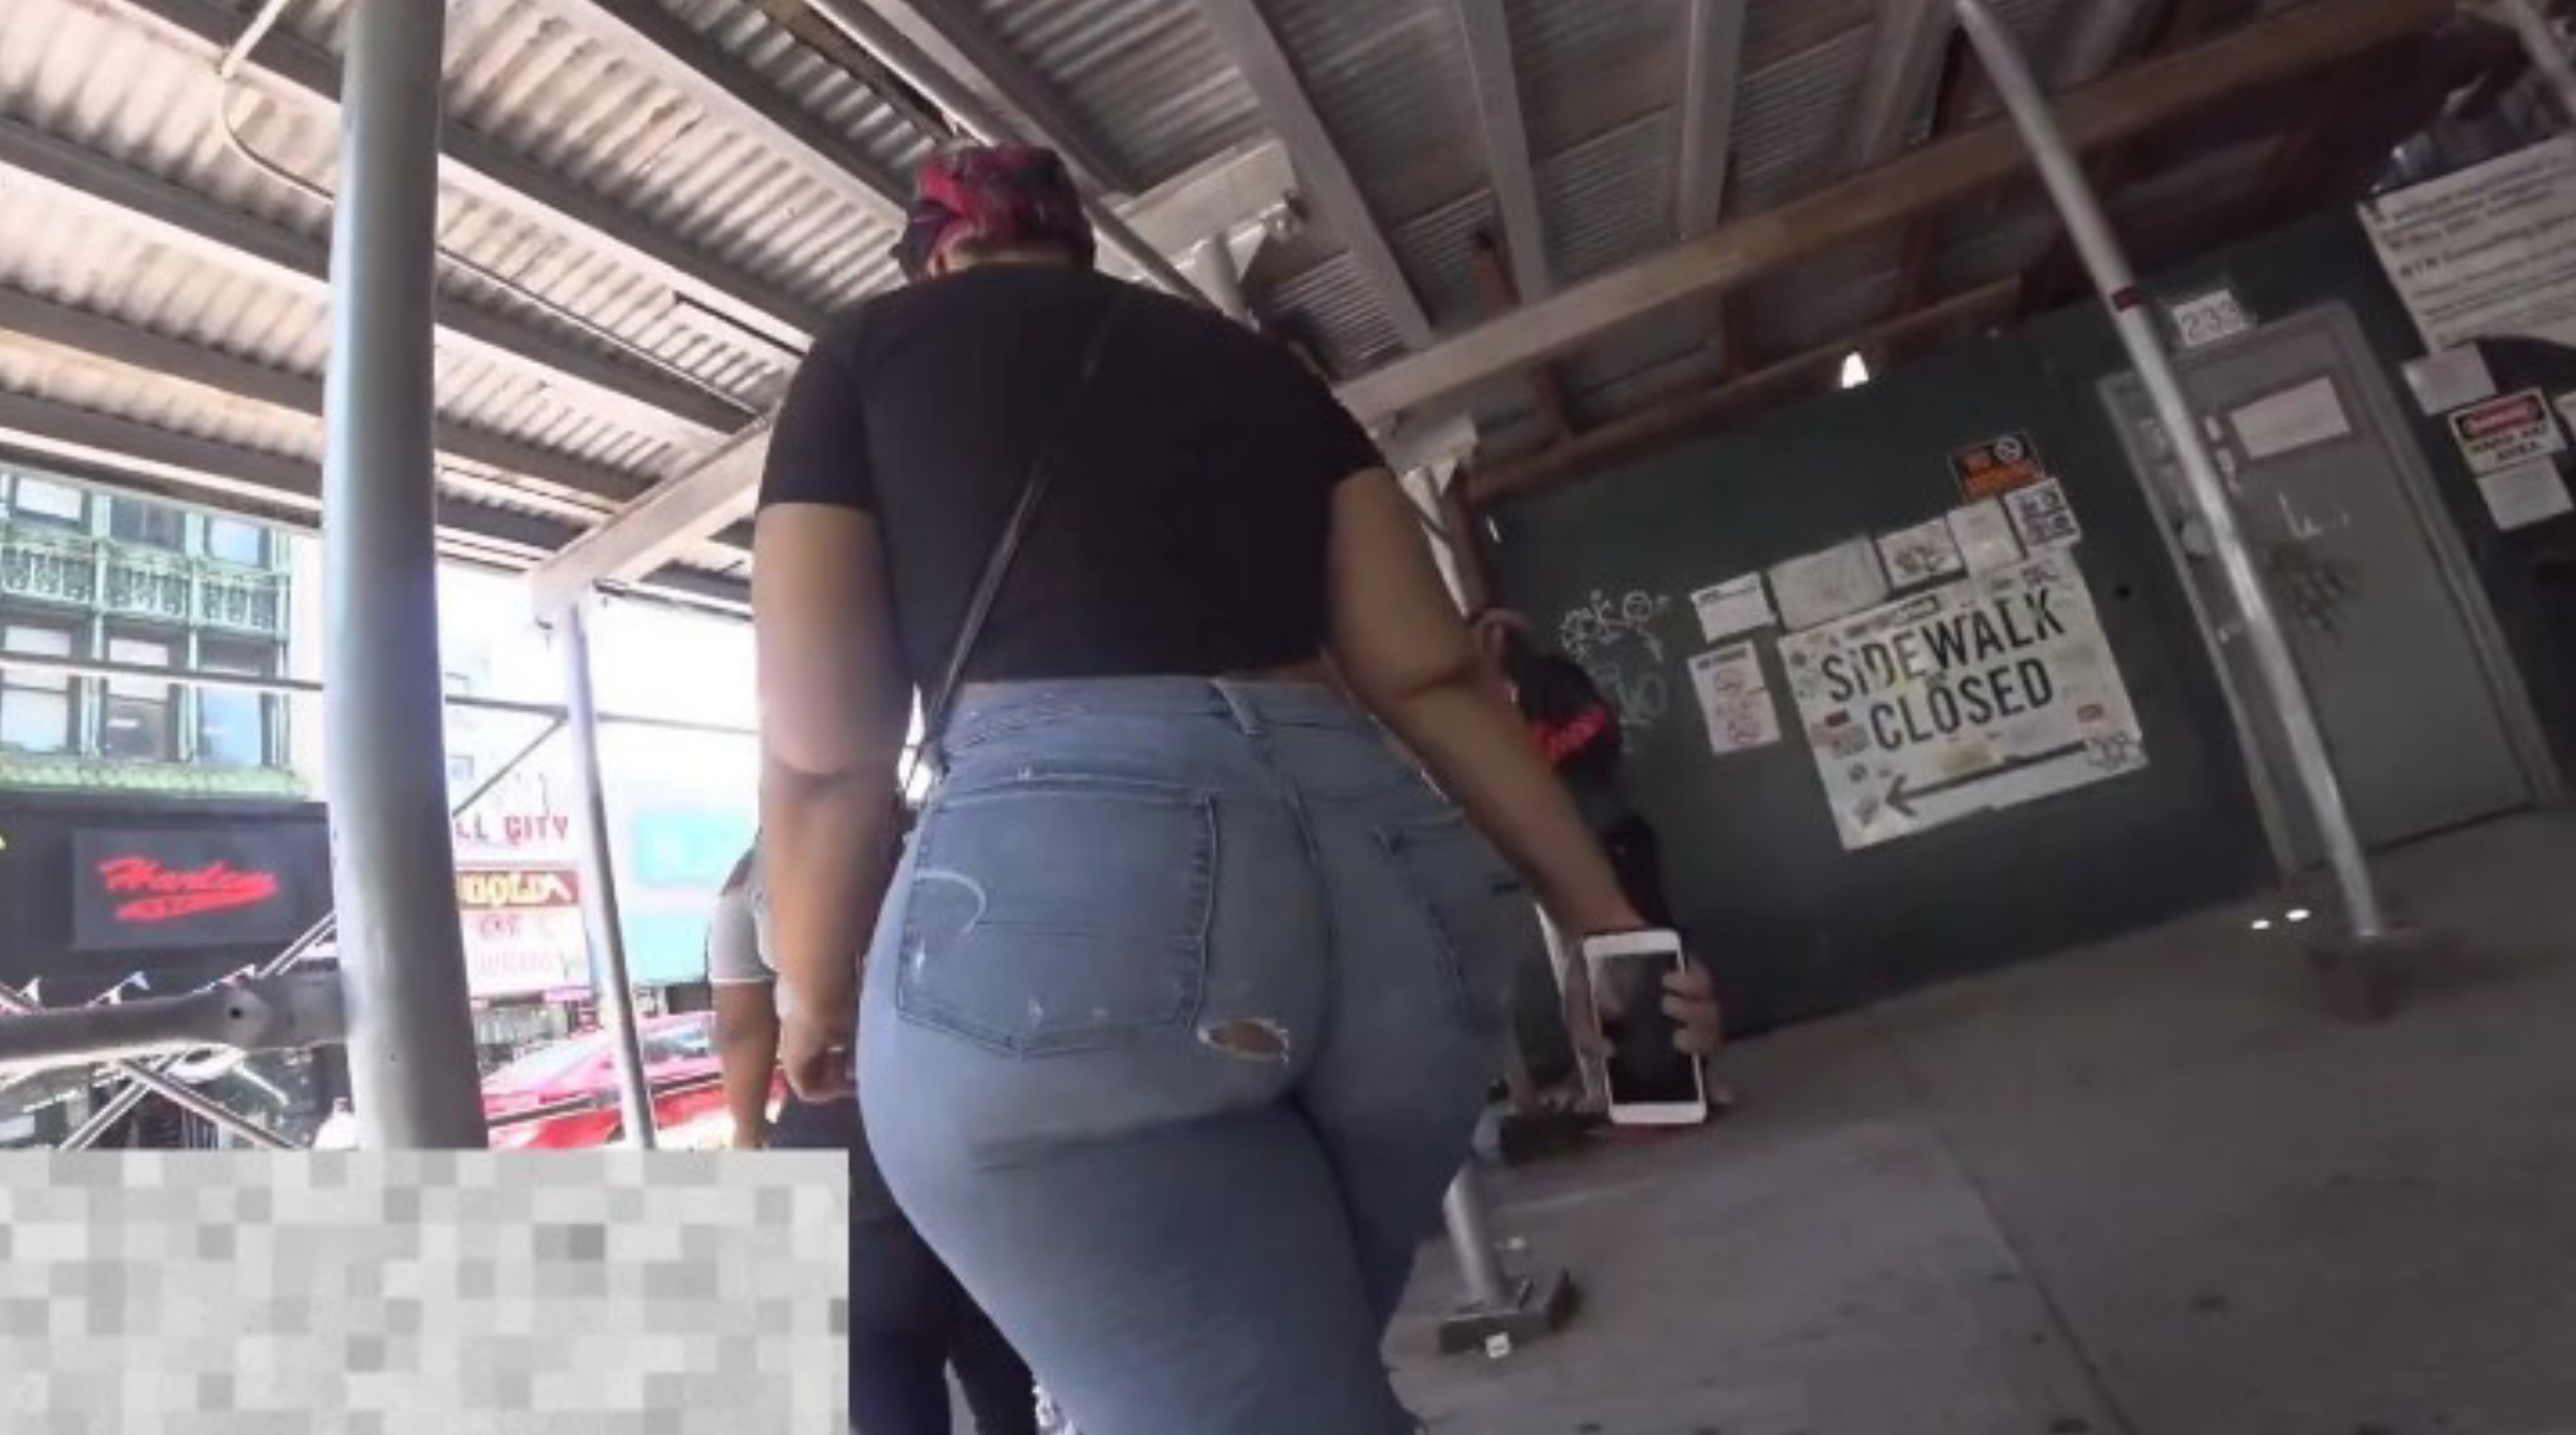 EPIC MONSTER BBW BIG ASS CANDID TIGHT JEANS